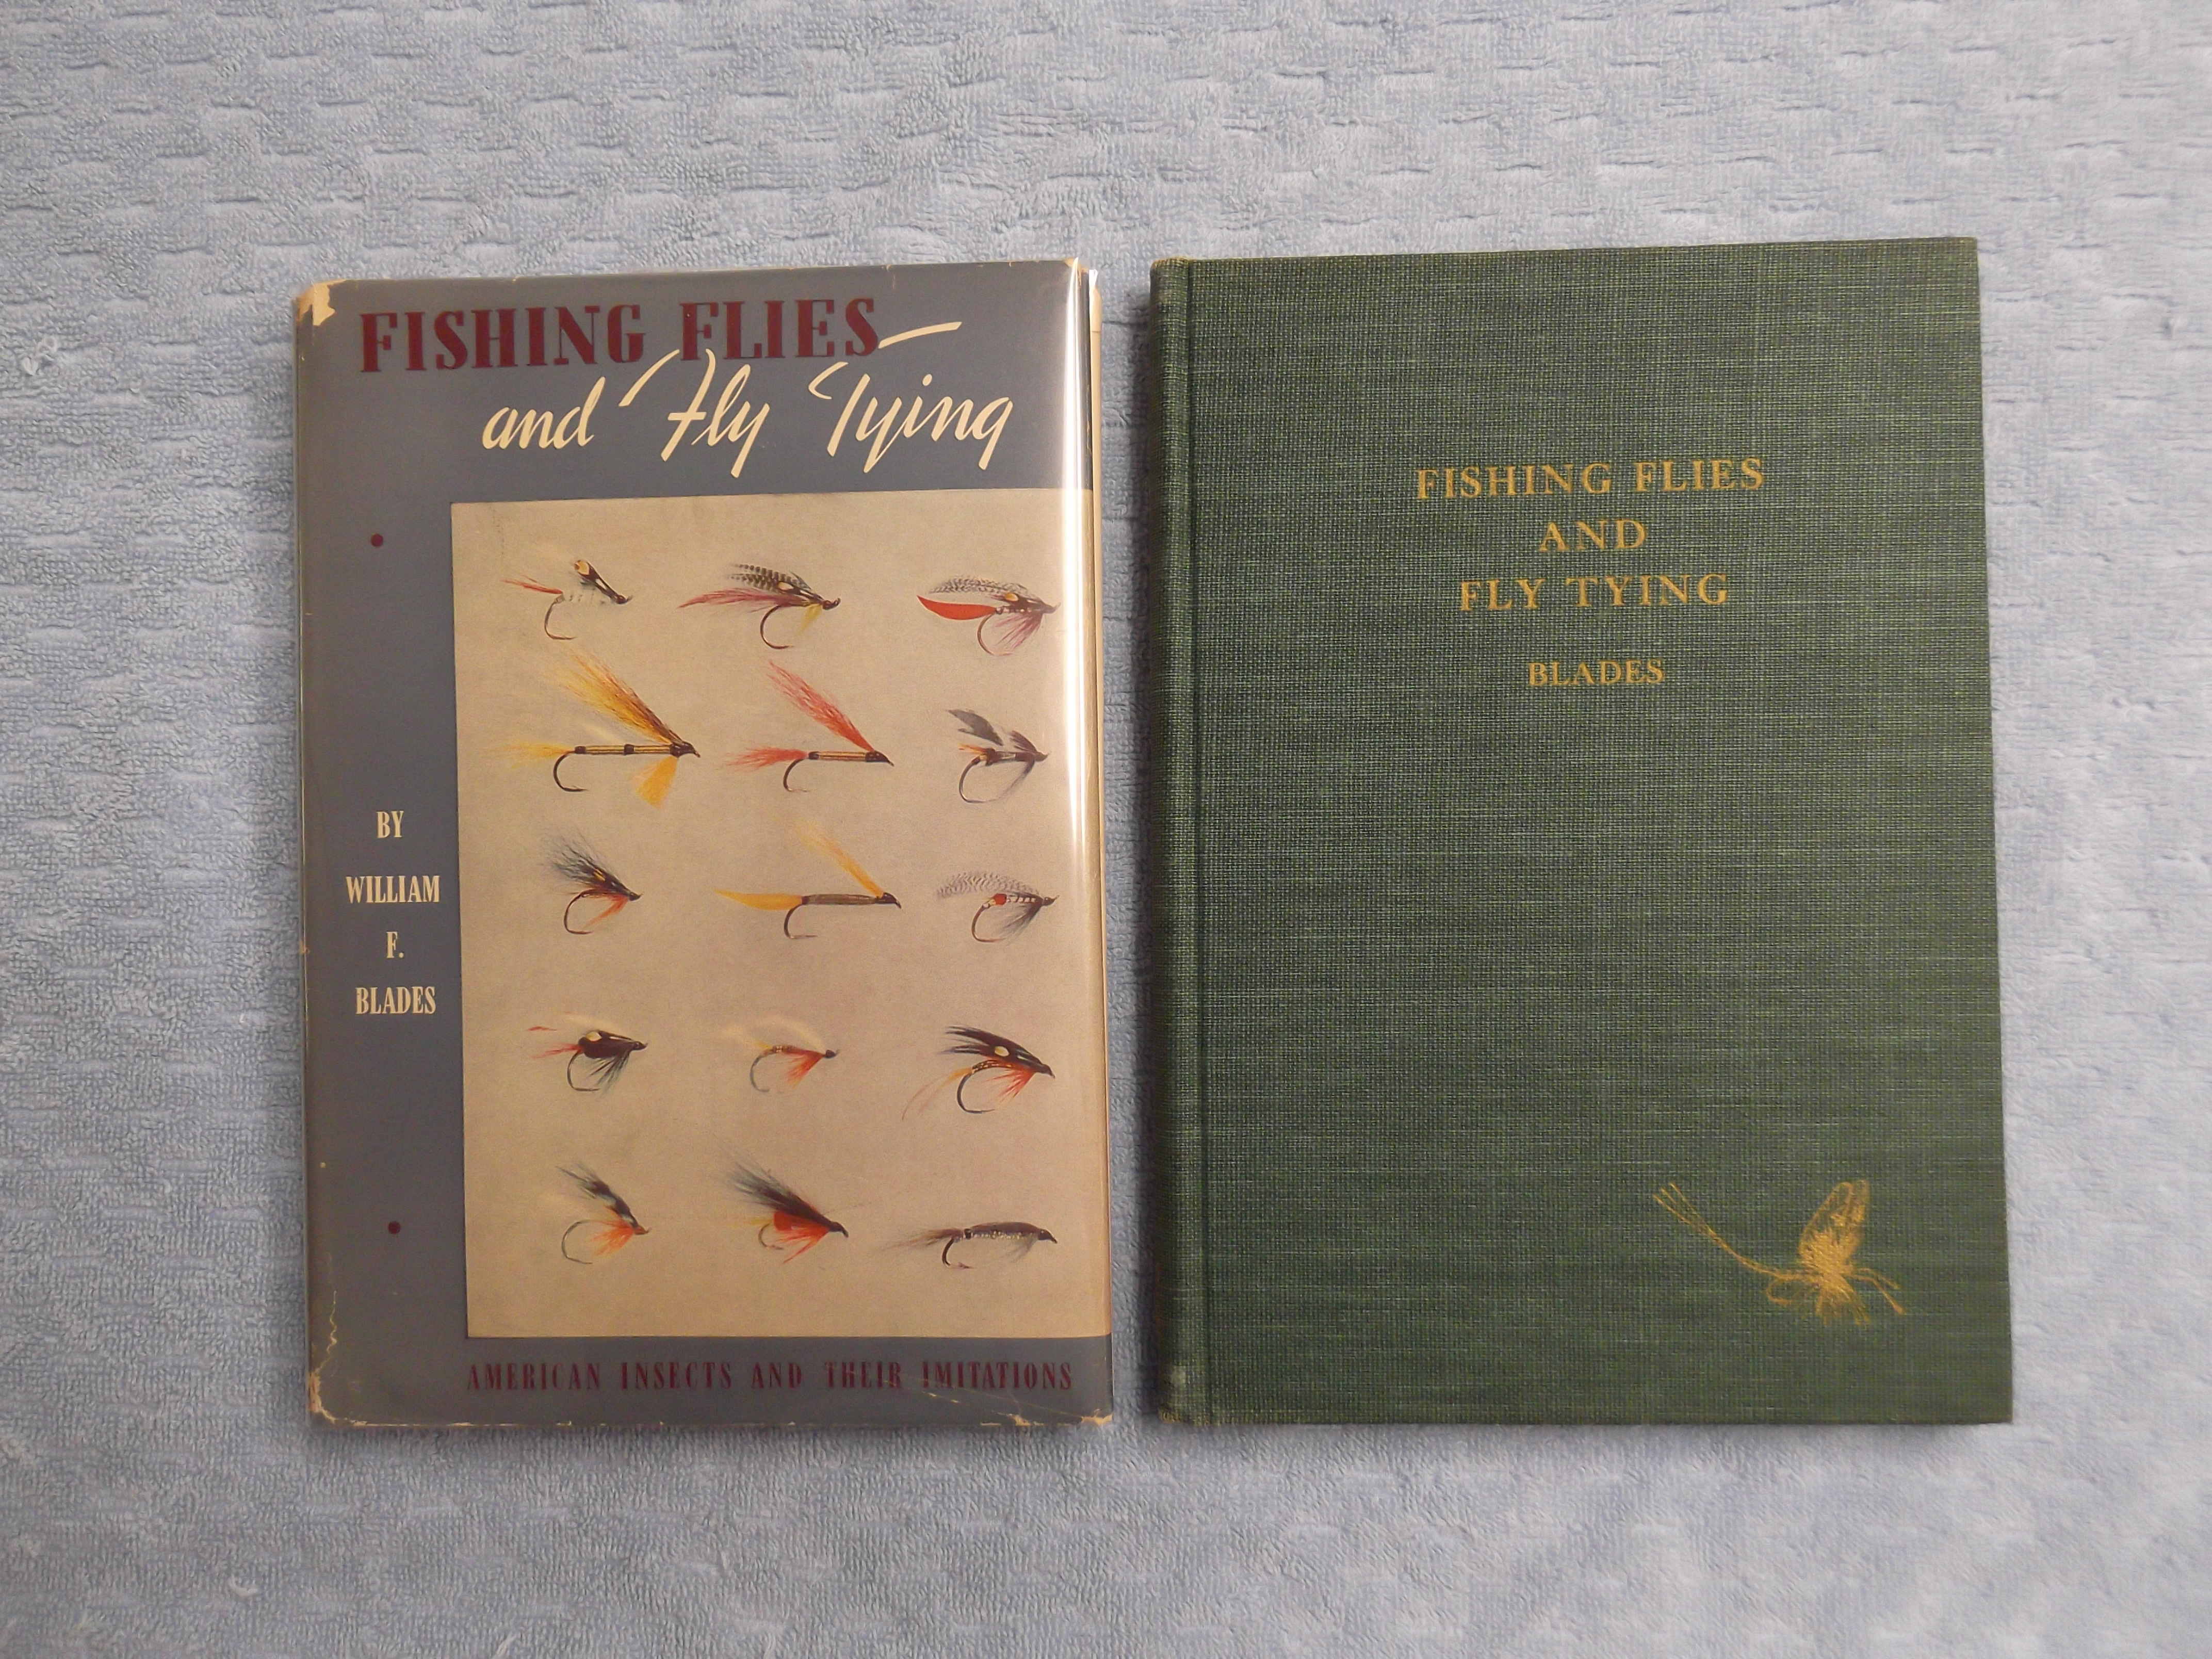 Fishing Flies and Fly Tying. American Insects and Their Imitations. by  William F. Blades.: First Edition.